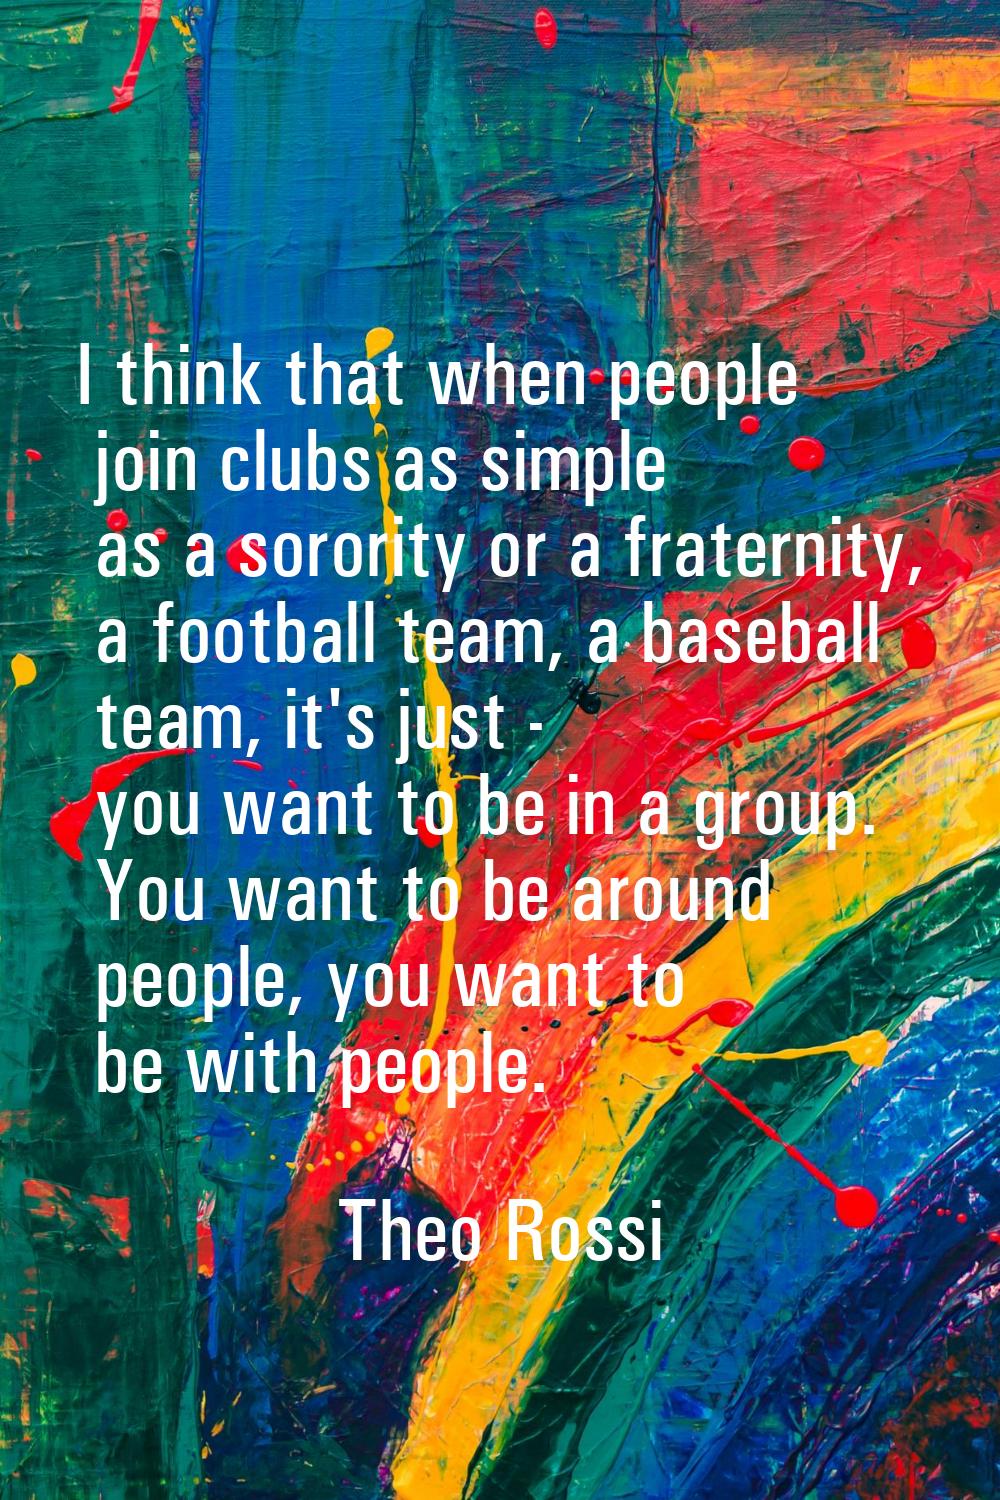 I think that when people join clubs as simple as a sorority or a fraternity, a football team, a bas